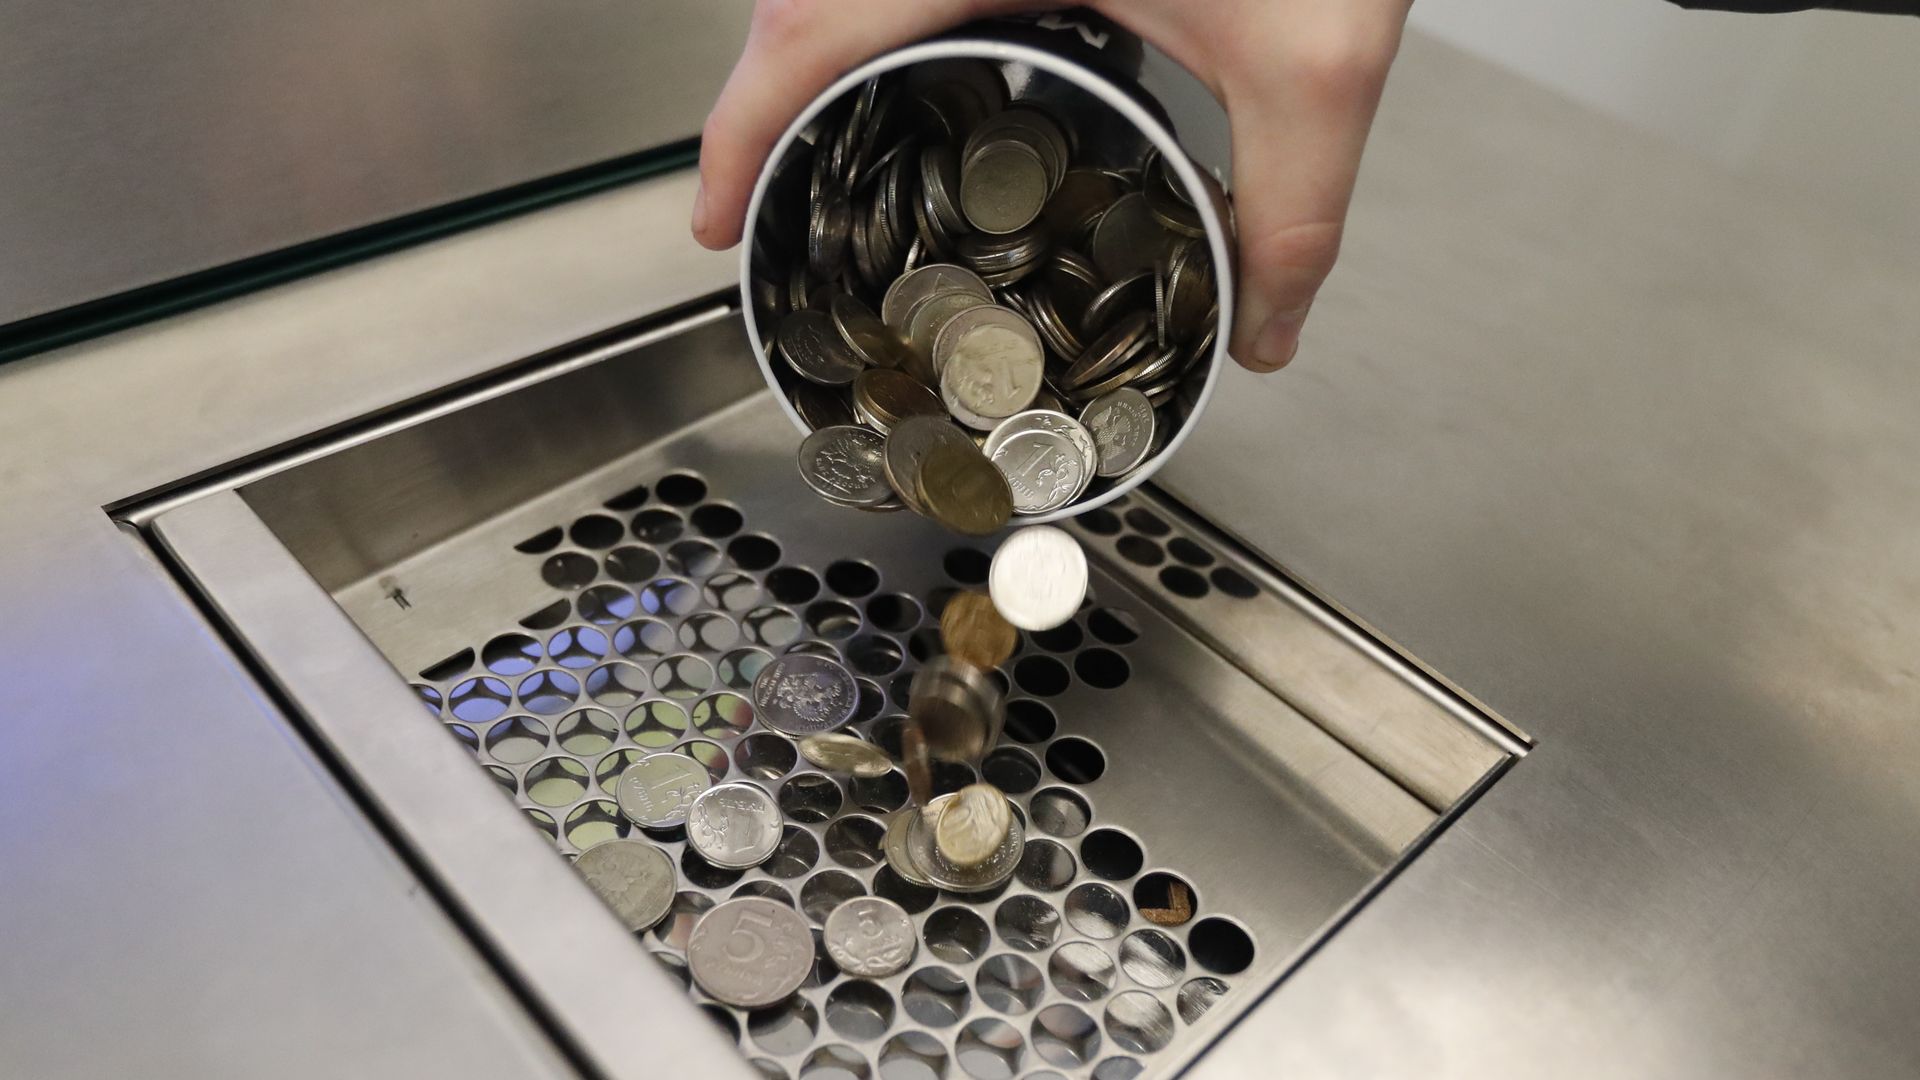 A photo of coins being poured from a cup into a coin machine.